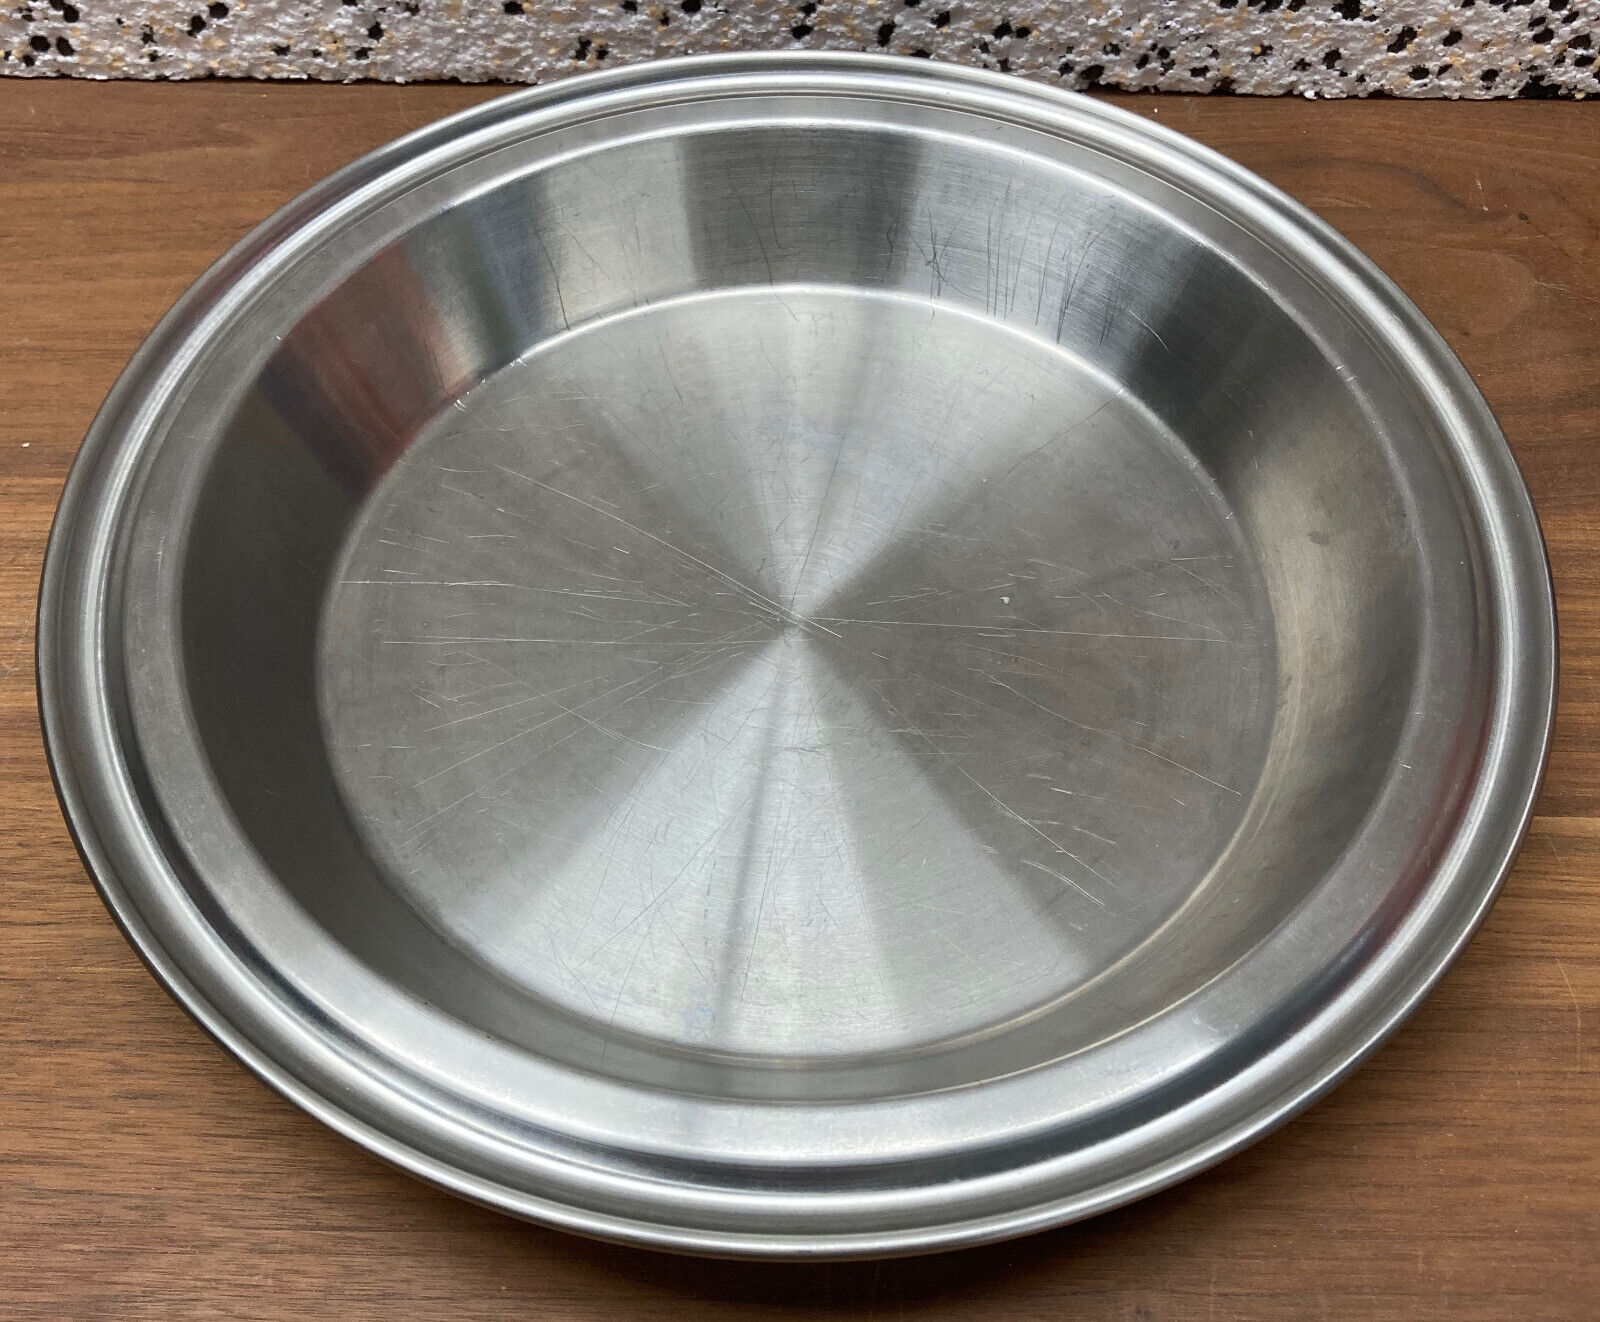 Vintage Heavy Stainless Steel Pie Plate/Pan No-Drip USA FREE CONUS SHIPPING